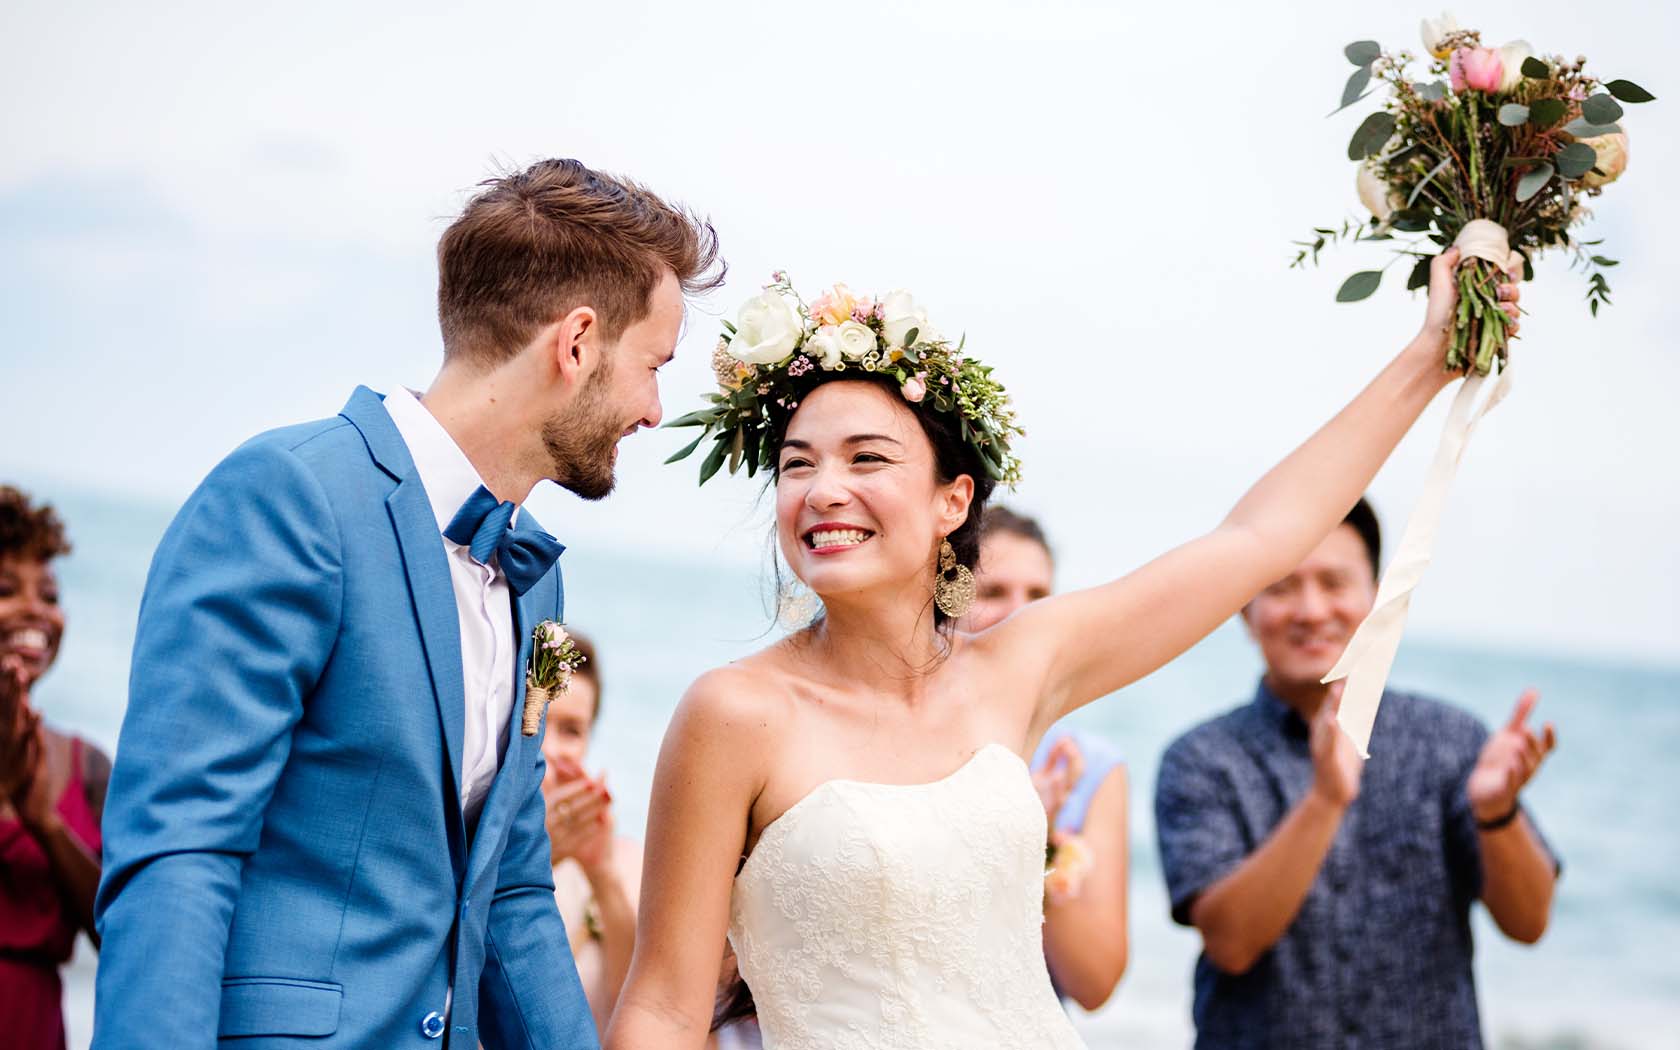 A bride is shown lifting her bouquet into the air and smiling at her new husband as wedding guests clap and cheer in the background.